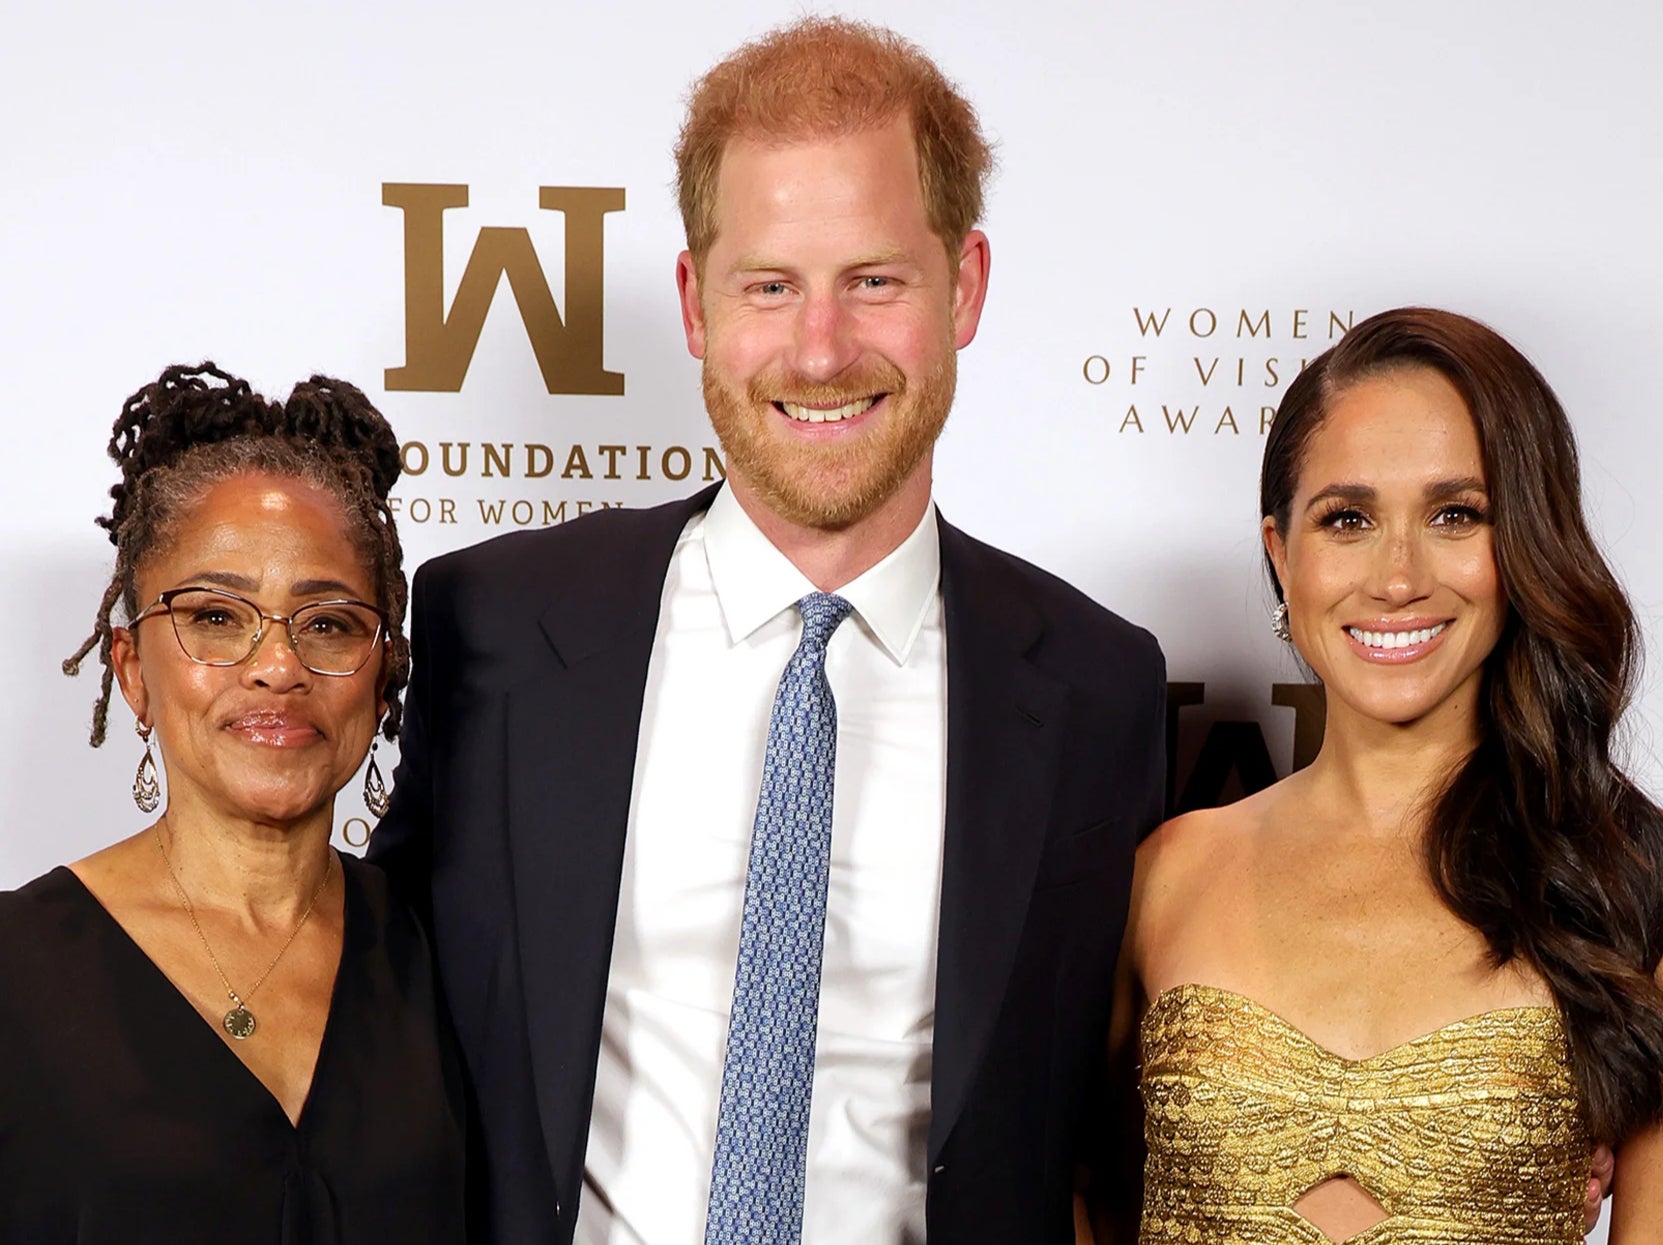 Doria Ragland with the Duke and Duchess of Sussex at the Ms. Foundation award gala on Tuesday night before the incident